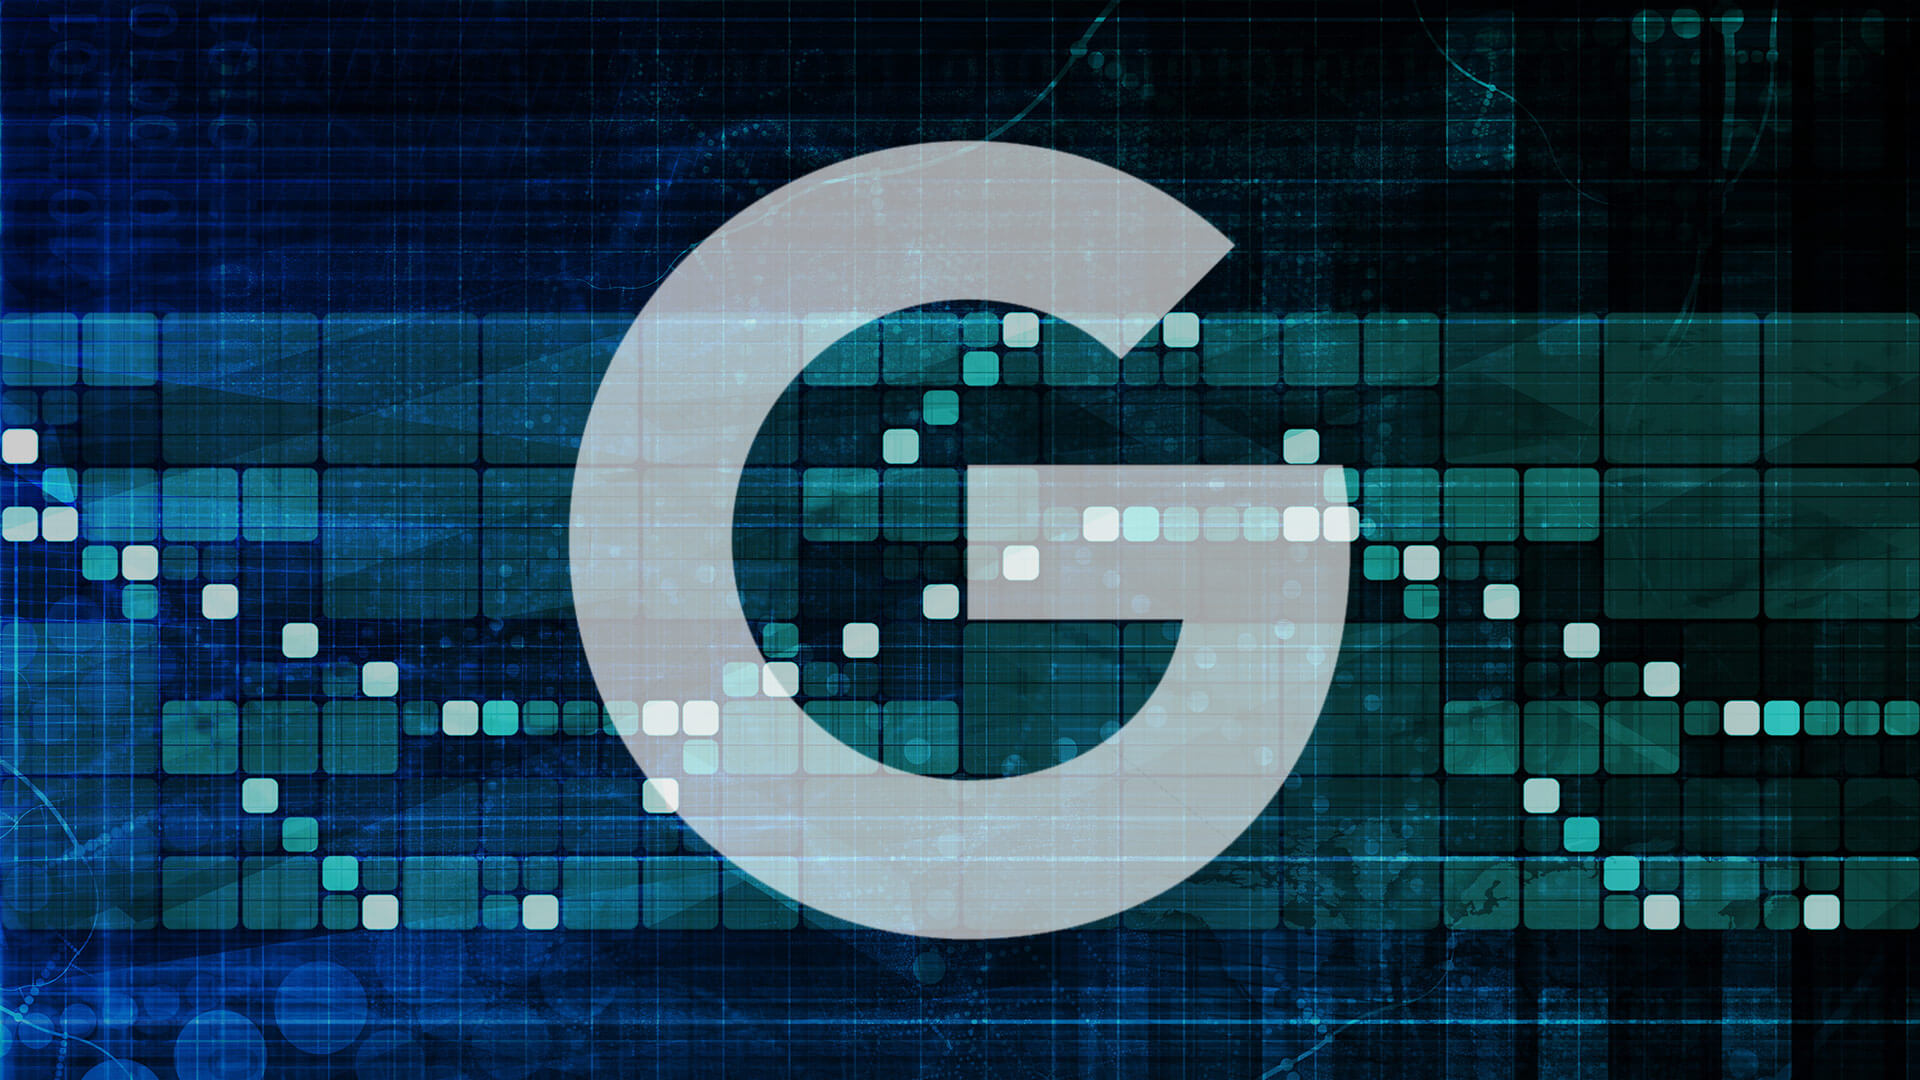 Google can now search for datasets. First research, then the world?